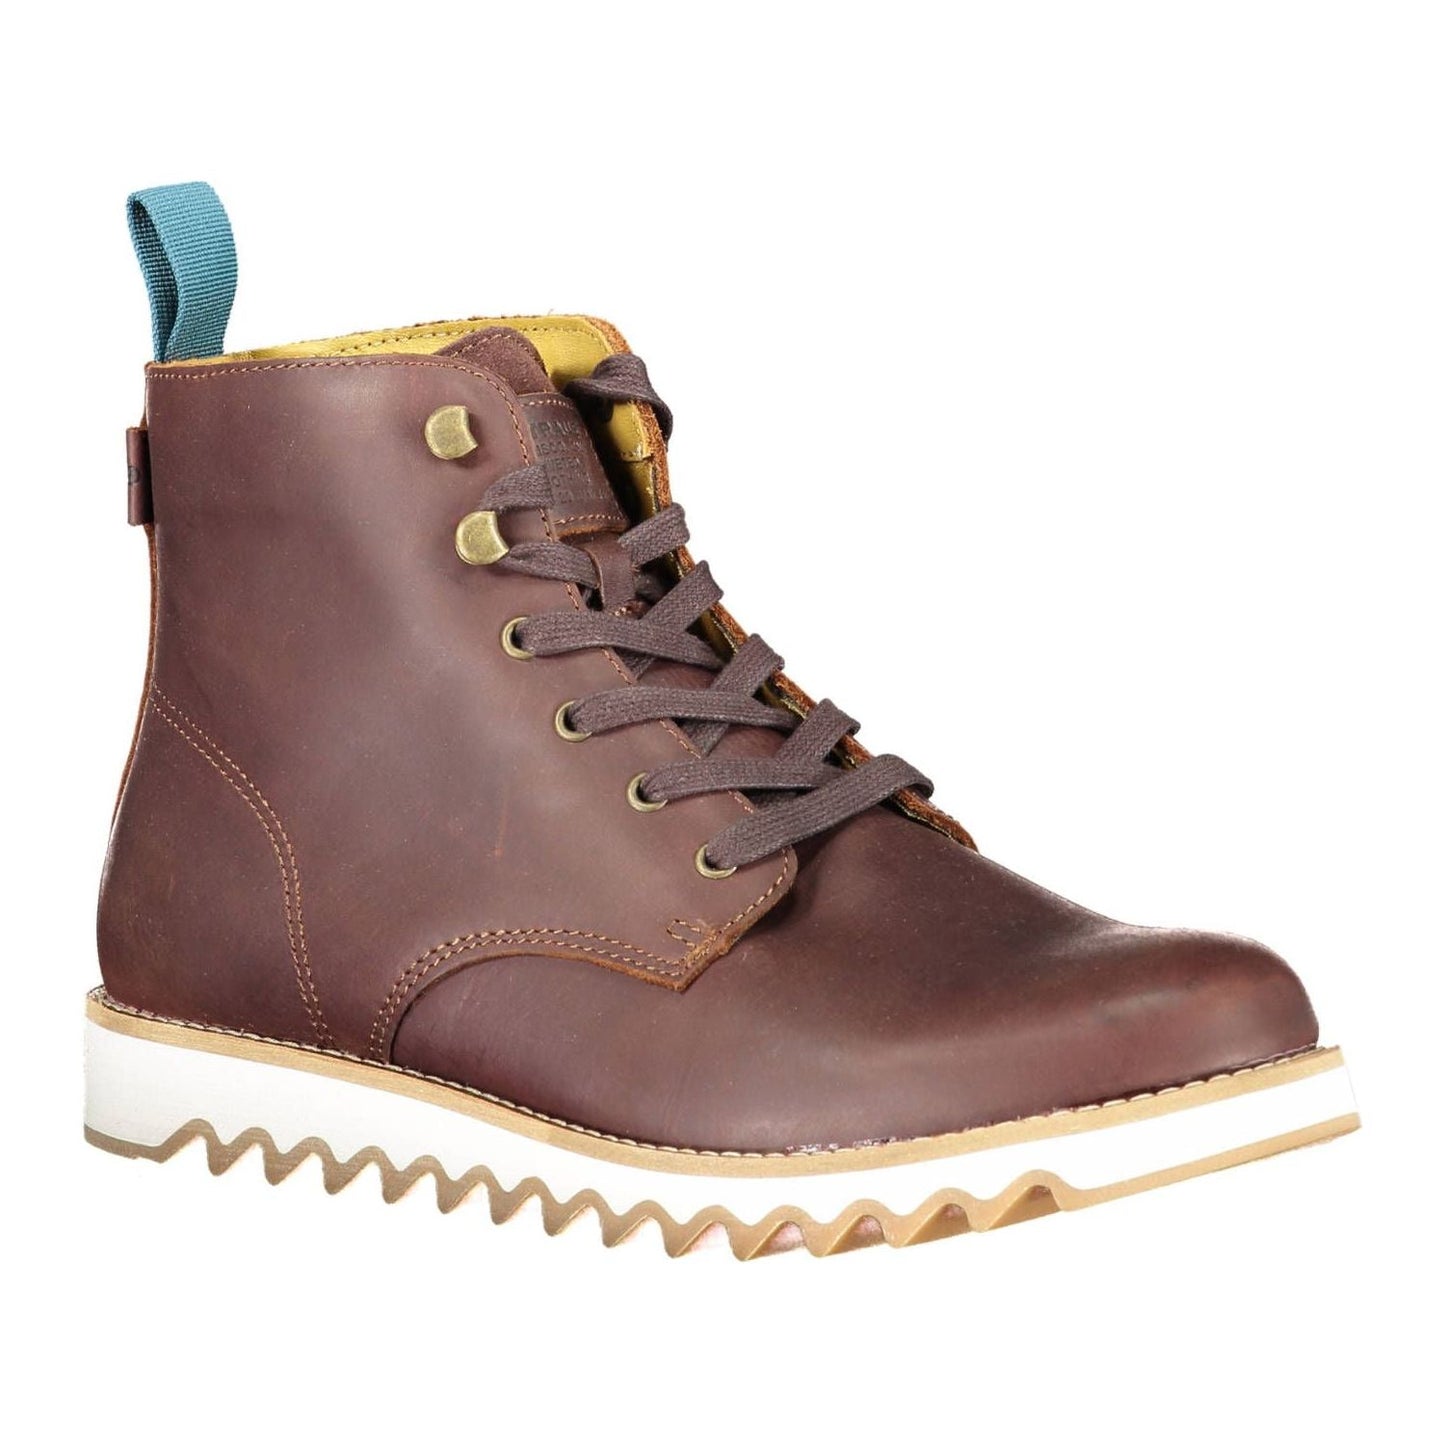 Levi's Elevated Brown Ankle Lace-Up Boots with Contrasting Sole elevated-brown-ankle-lace-up-boots-with-contrasting-sole